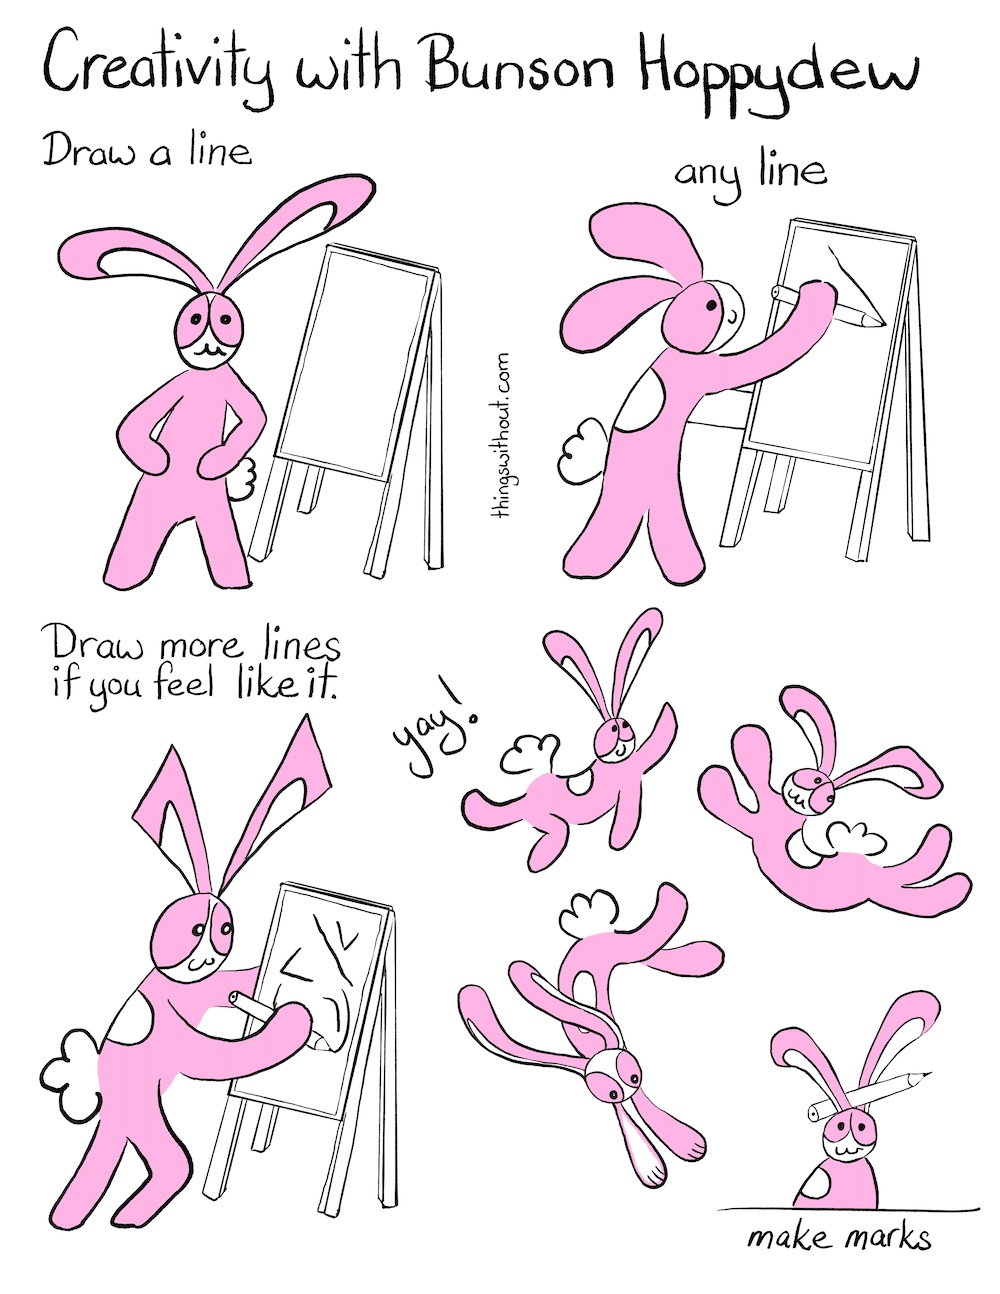 Make Marks Comic Transcript Bunson Hoppydew (he is a pink bunny who likes dancing friendship and cake) is standing in front of an easel with his hands on his hips. Caption: Draw a line. Bunson is drawing a line on the easel with a large pencil. Caption: Any line. Bunson has drawn a lot more lines. Caption: Draw more lines if you feel like it. Bunson: yay! Bunson spoings and jumps and dances around. Bunson is sitting down looking at us, there is a pencil tucked between his ears. Caption: Make marks.